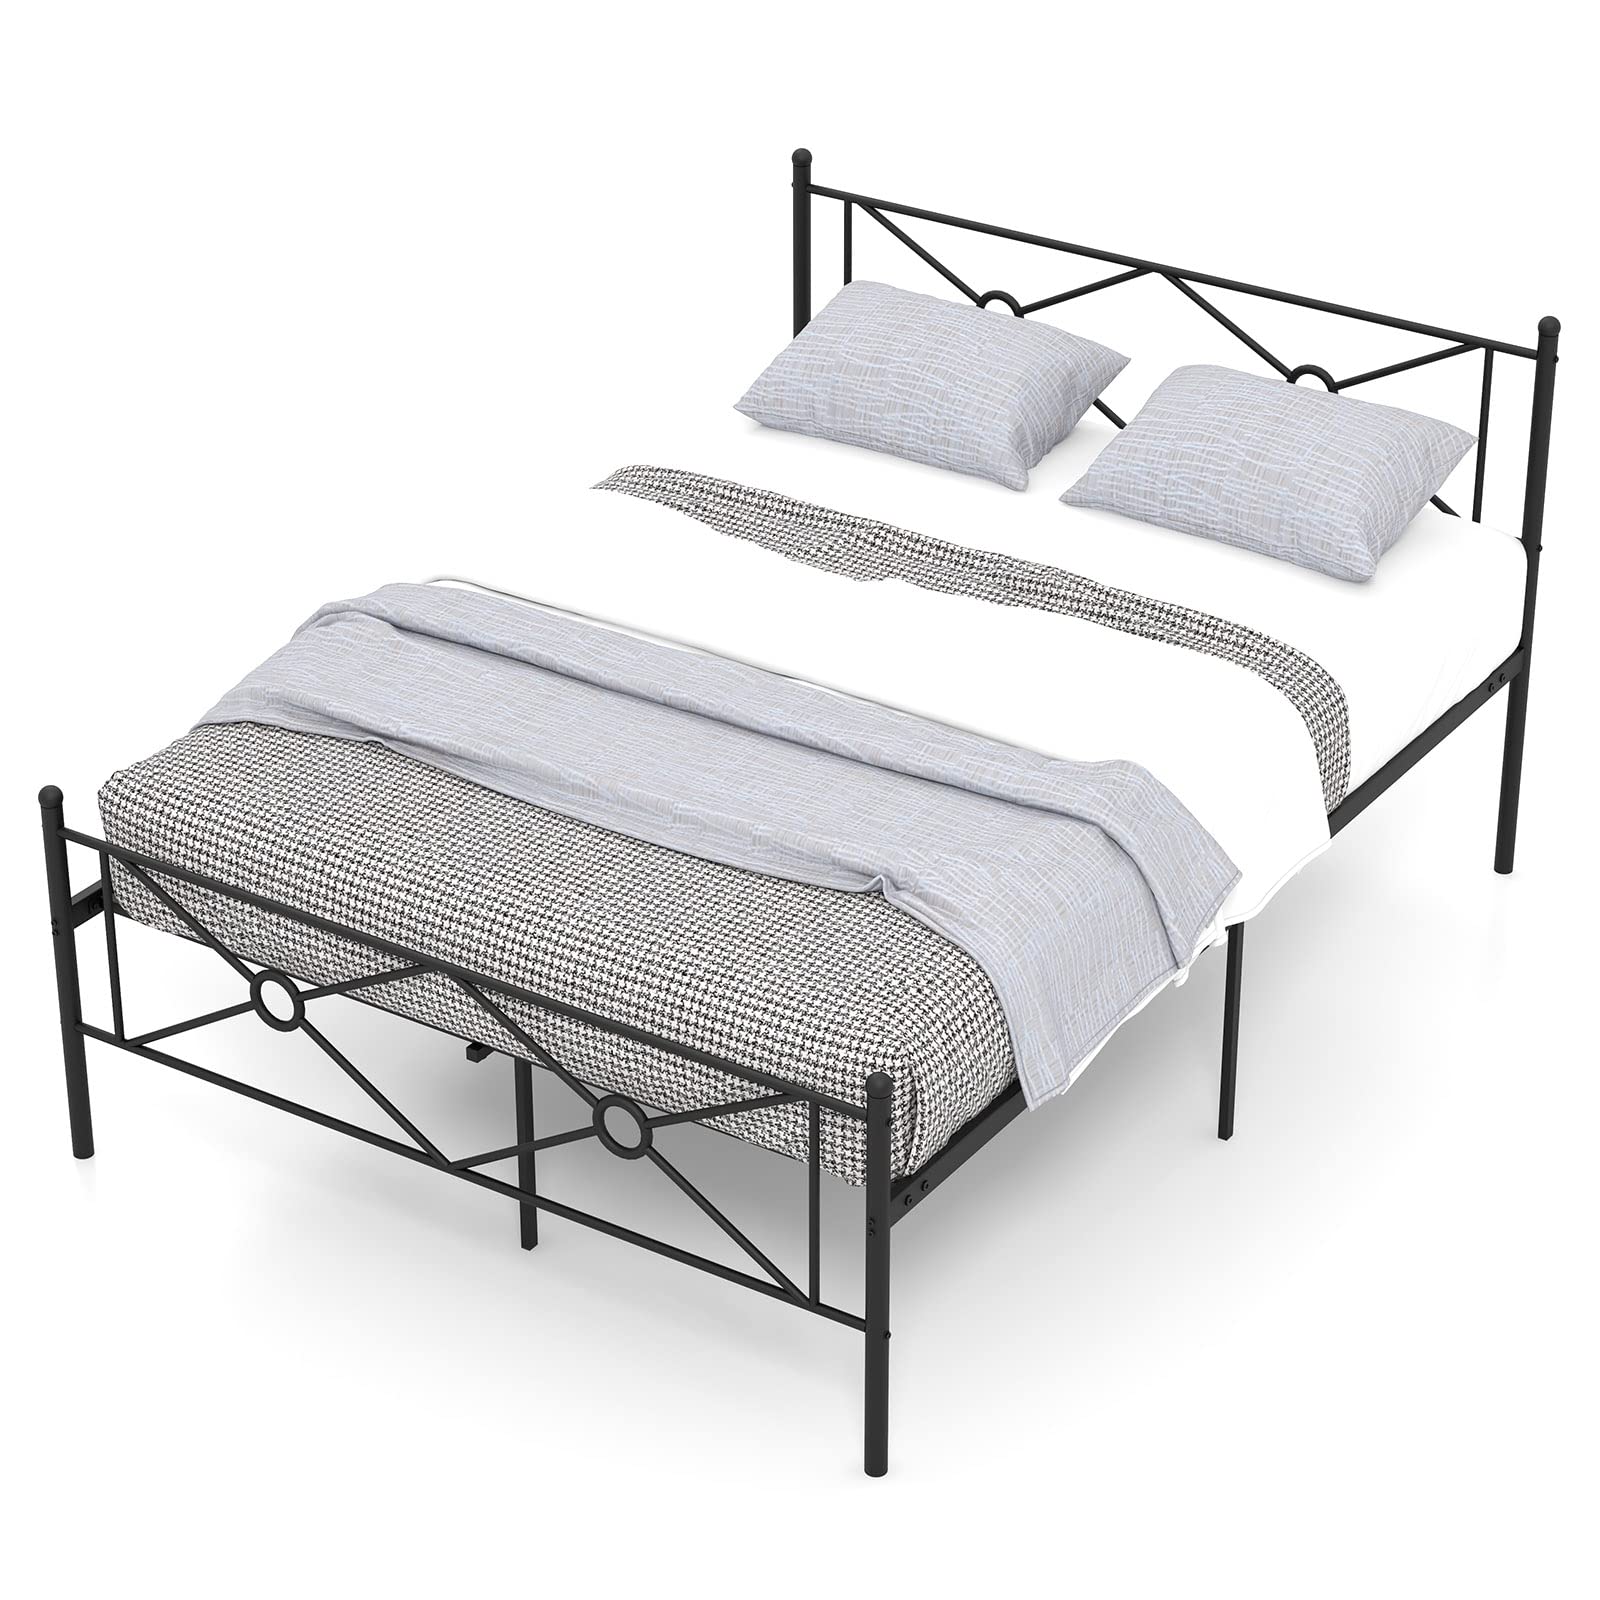 Giantex Full/Queen Size Metal Platform Bed Frame with Vintage Headboard and Footboard